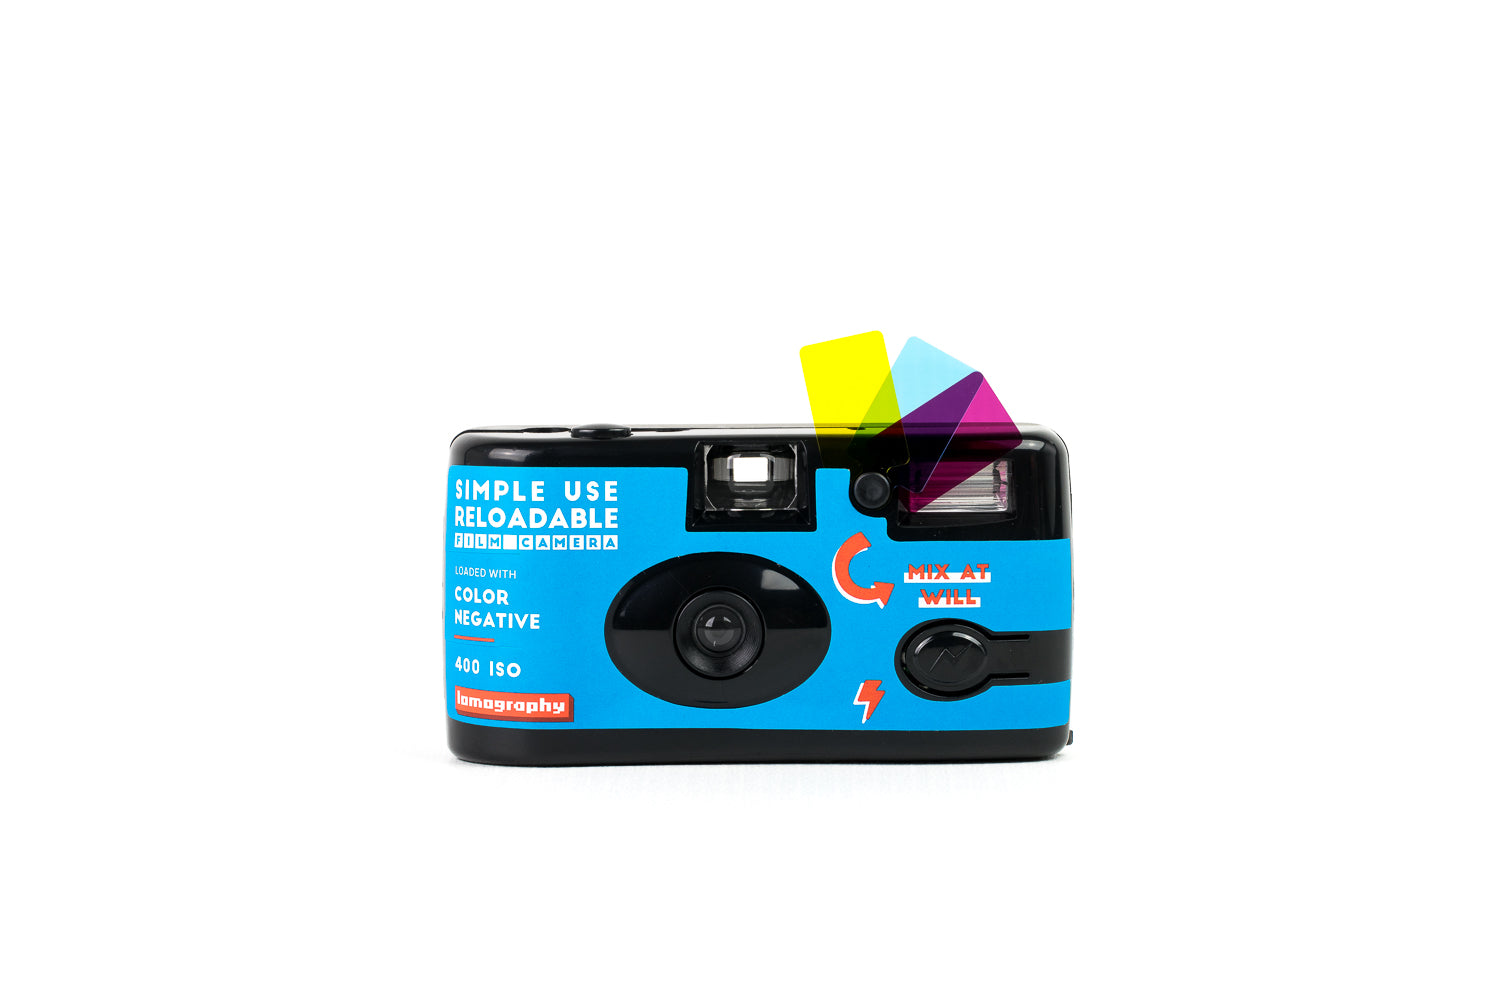 What are the different instant film formats? · Lomography